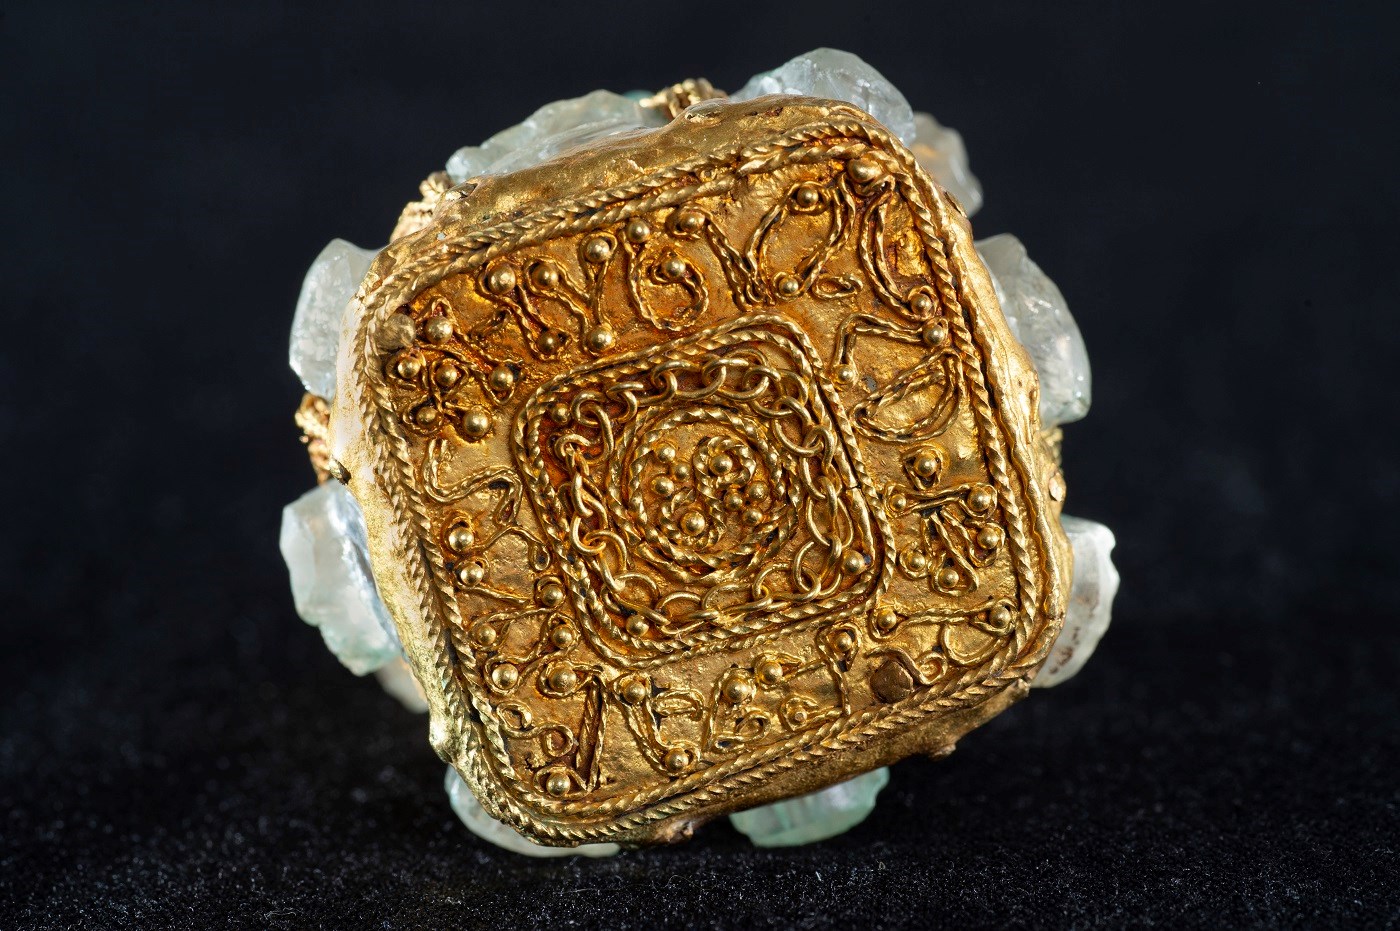 Square, golden base of the jar with golden, rope-like lines spelling the name 'Hyguald' around the edges.